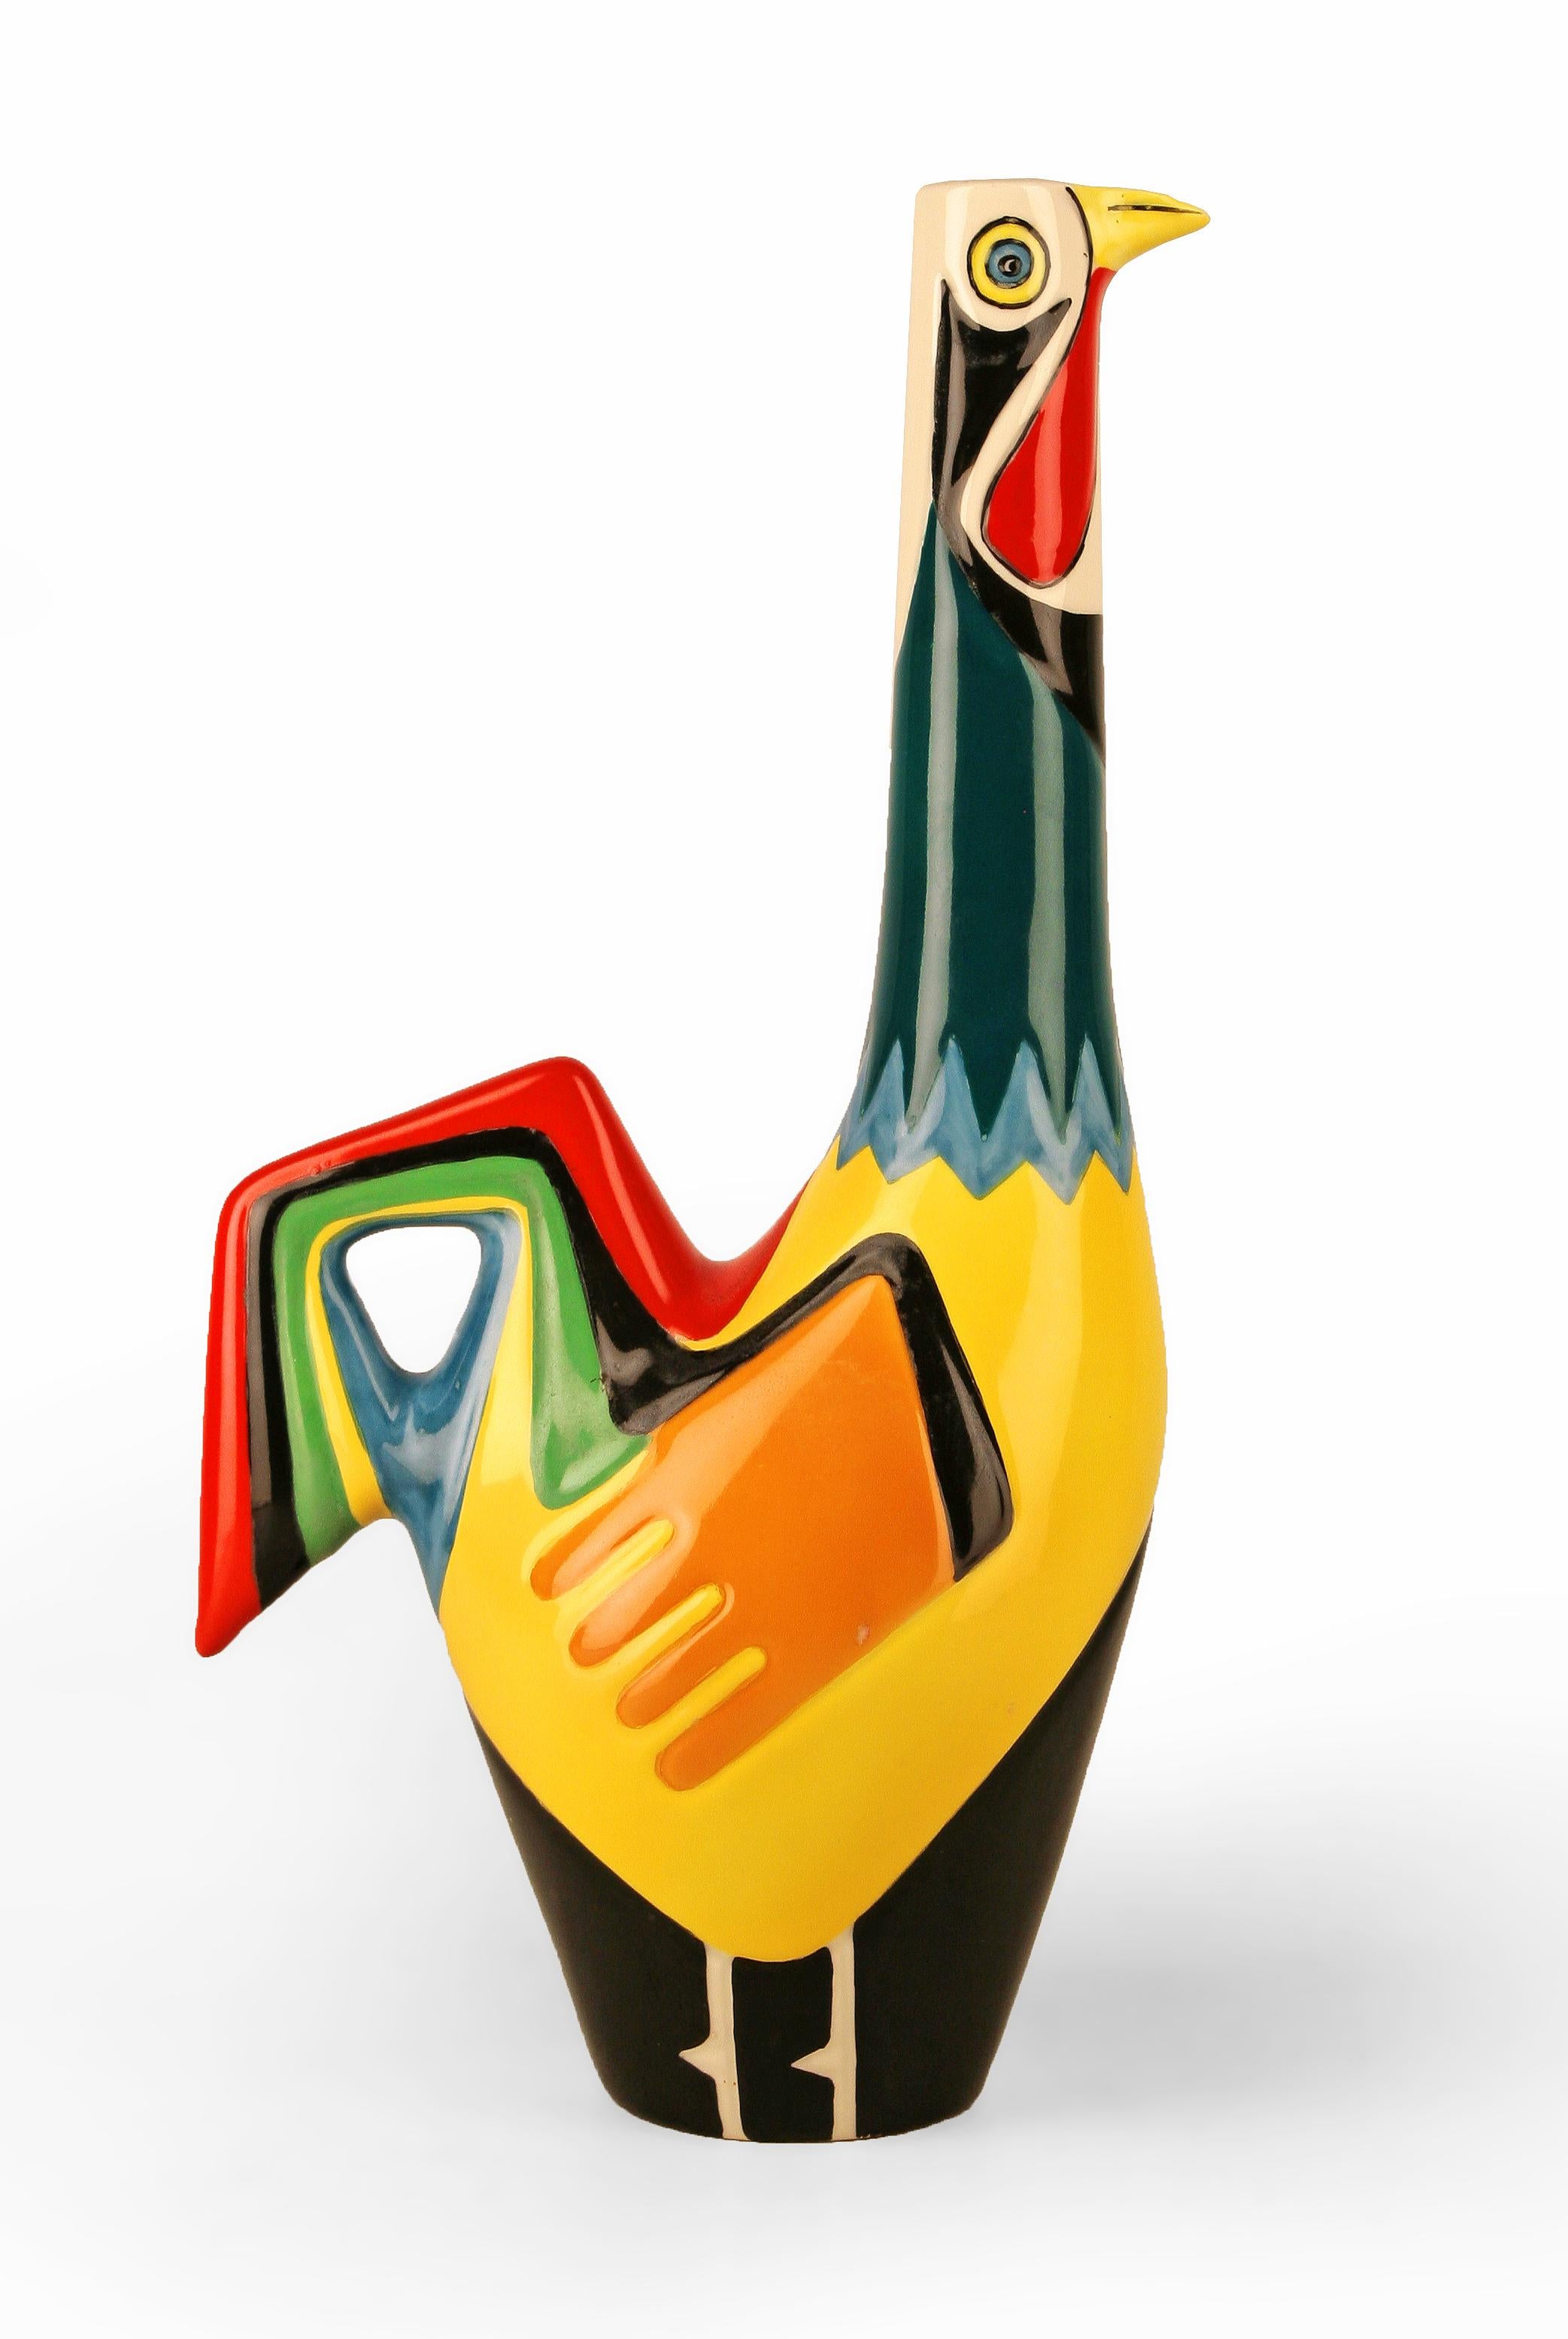 Molded Portuguese Colorful Enameled Ceramic Rooster Decanter/Pitcher by Real Vinícola For Sale